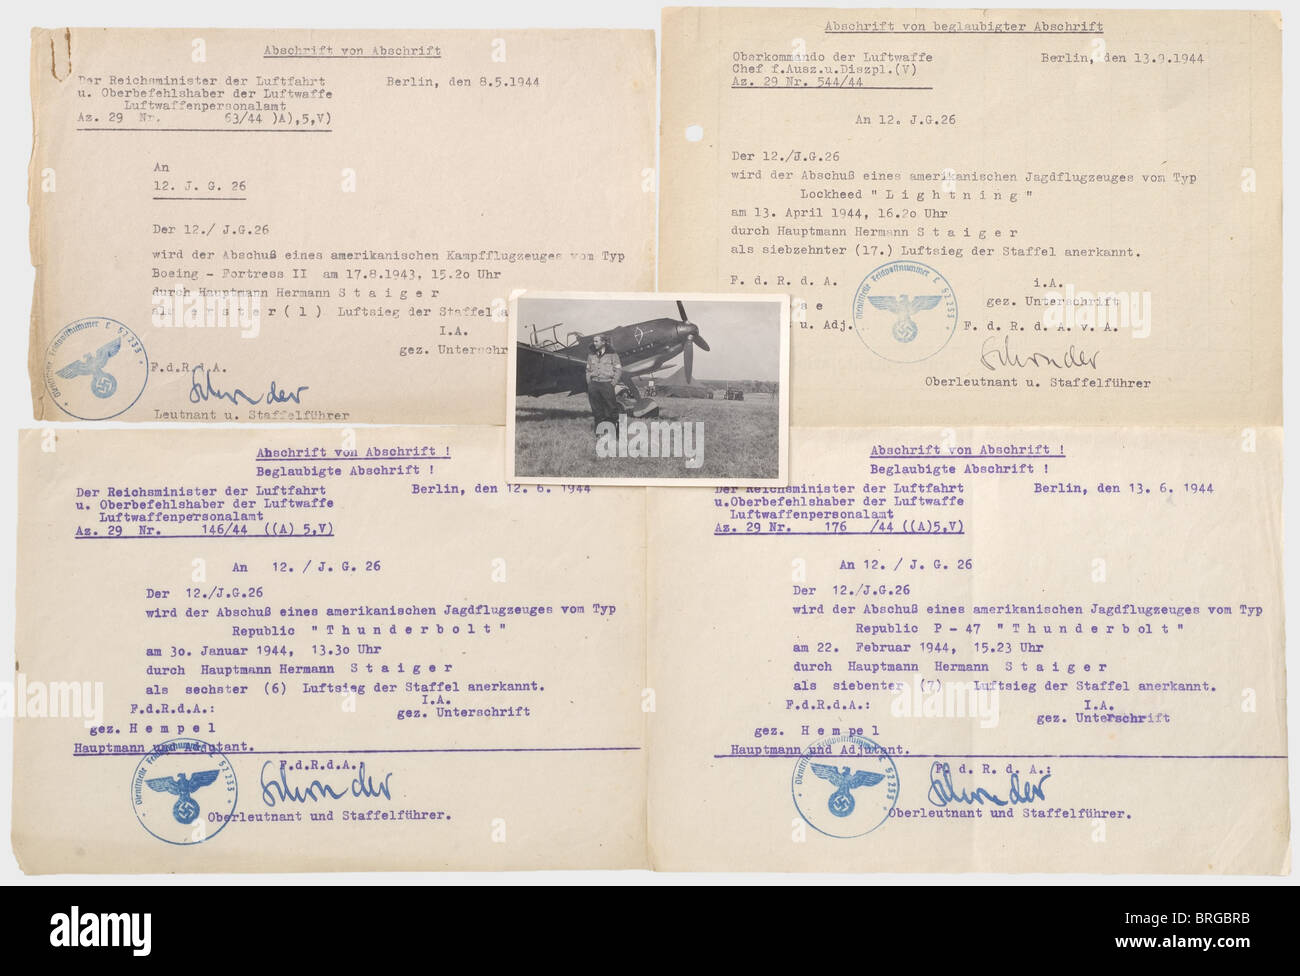 Major Hermann Staiger, documents and photographs Performance book for fighter pilots, issued by 12./JG 26 'Schlageter' on 19 September 1943. Beginning with 26 carry-overs from England and Russia, air victories 27 - 54 listed with information like machine type, time, location and conditions including ten confirmed victories (Thunderbolt, Lightning, Fortress II). Award documents for the Commemorative Medal of 1 October 1938 (dated 20 October 1939 with ink signature von Massow) and for the Squadron Clasp for Fighter Pilots in Gold with pendant numbered '300' (date, Stock Photo